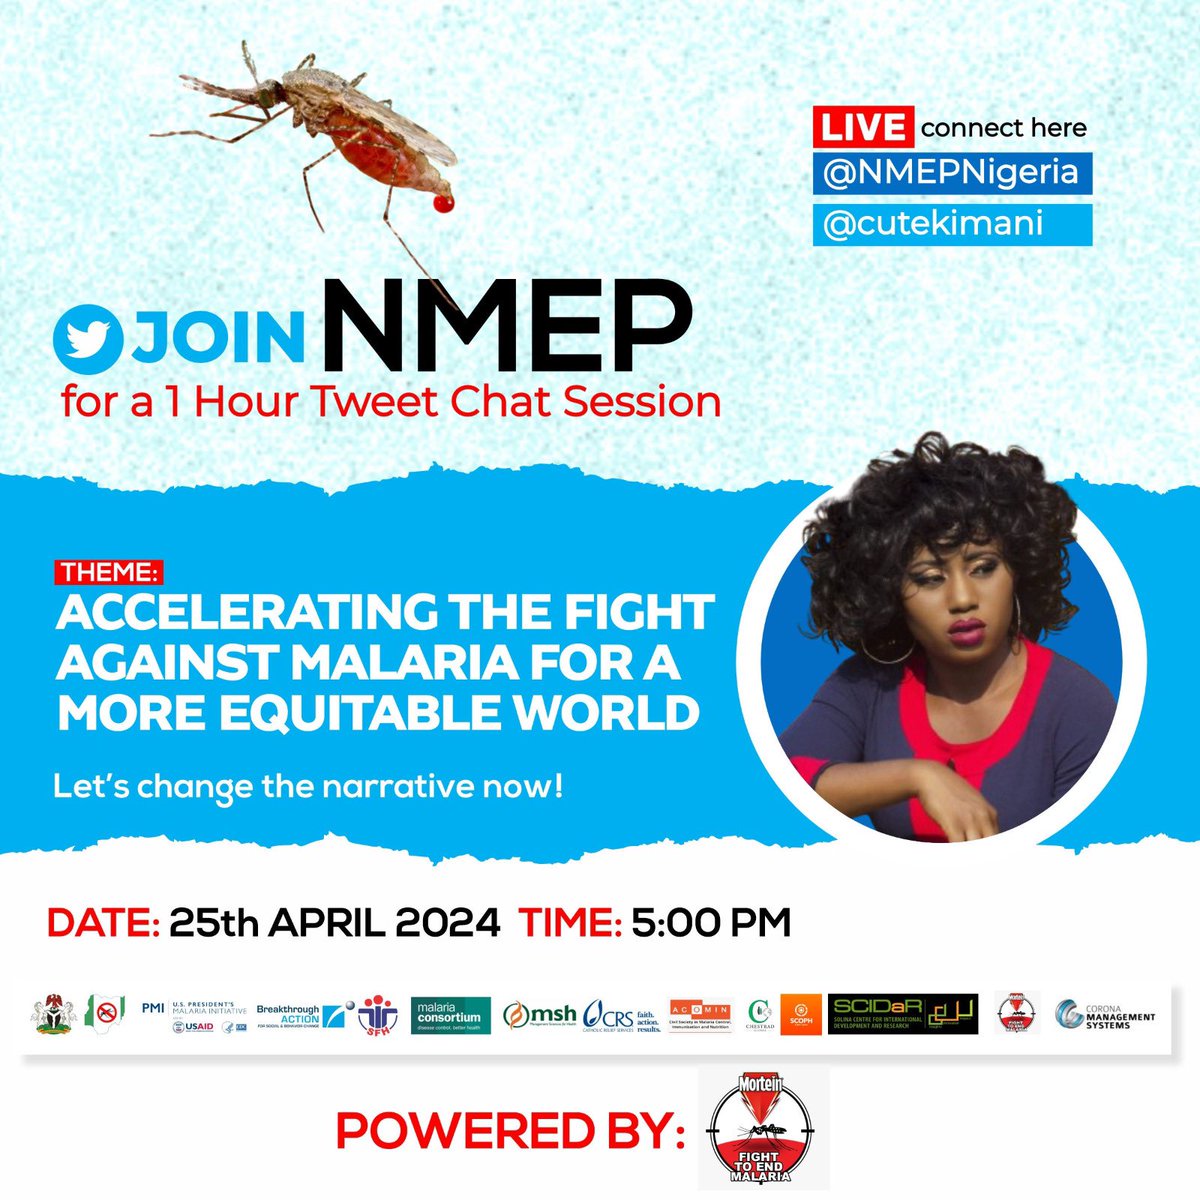 Kindly join our 1hr TweetChat session with @Cutekimani and @NMEPNigeria where they will be discussing 'ACCELERATING THE FIGGT AGAINST MALARIA FOR A MORE EQUITABLE WORLD'

Don't miss it #ZeroMalariaStartsWithMe